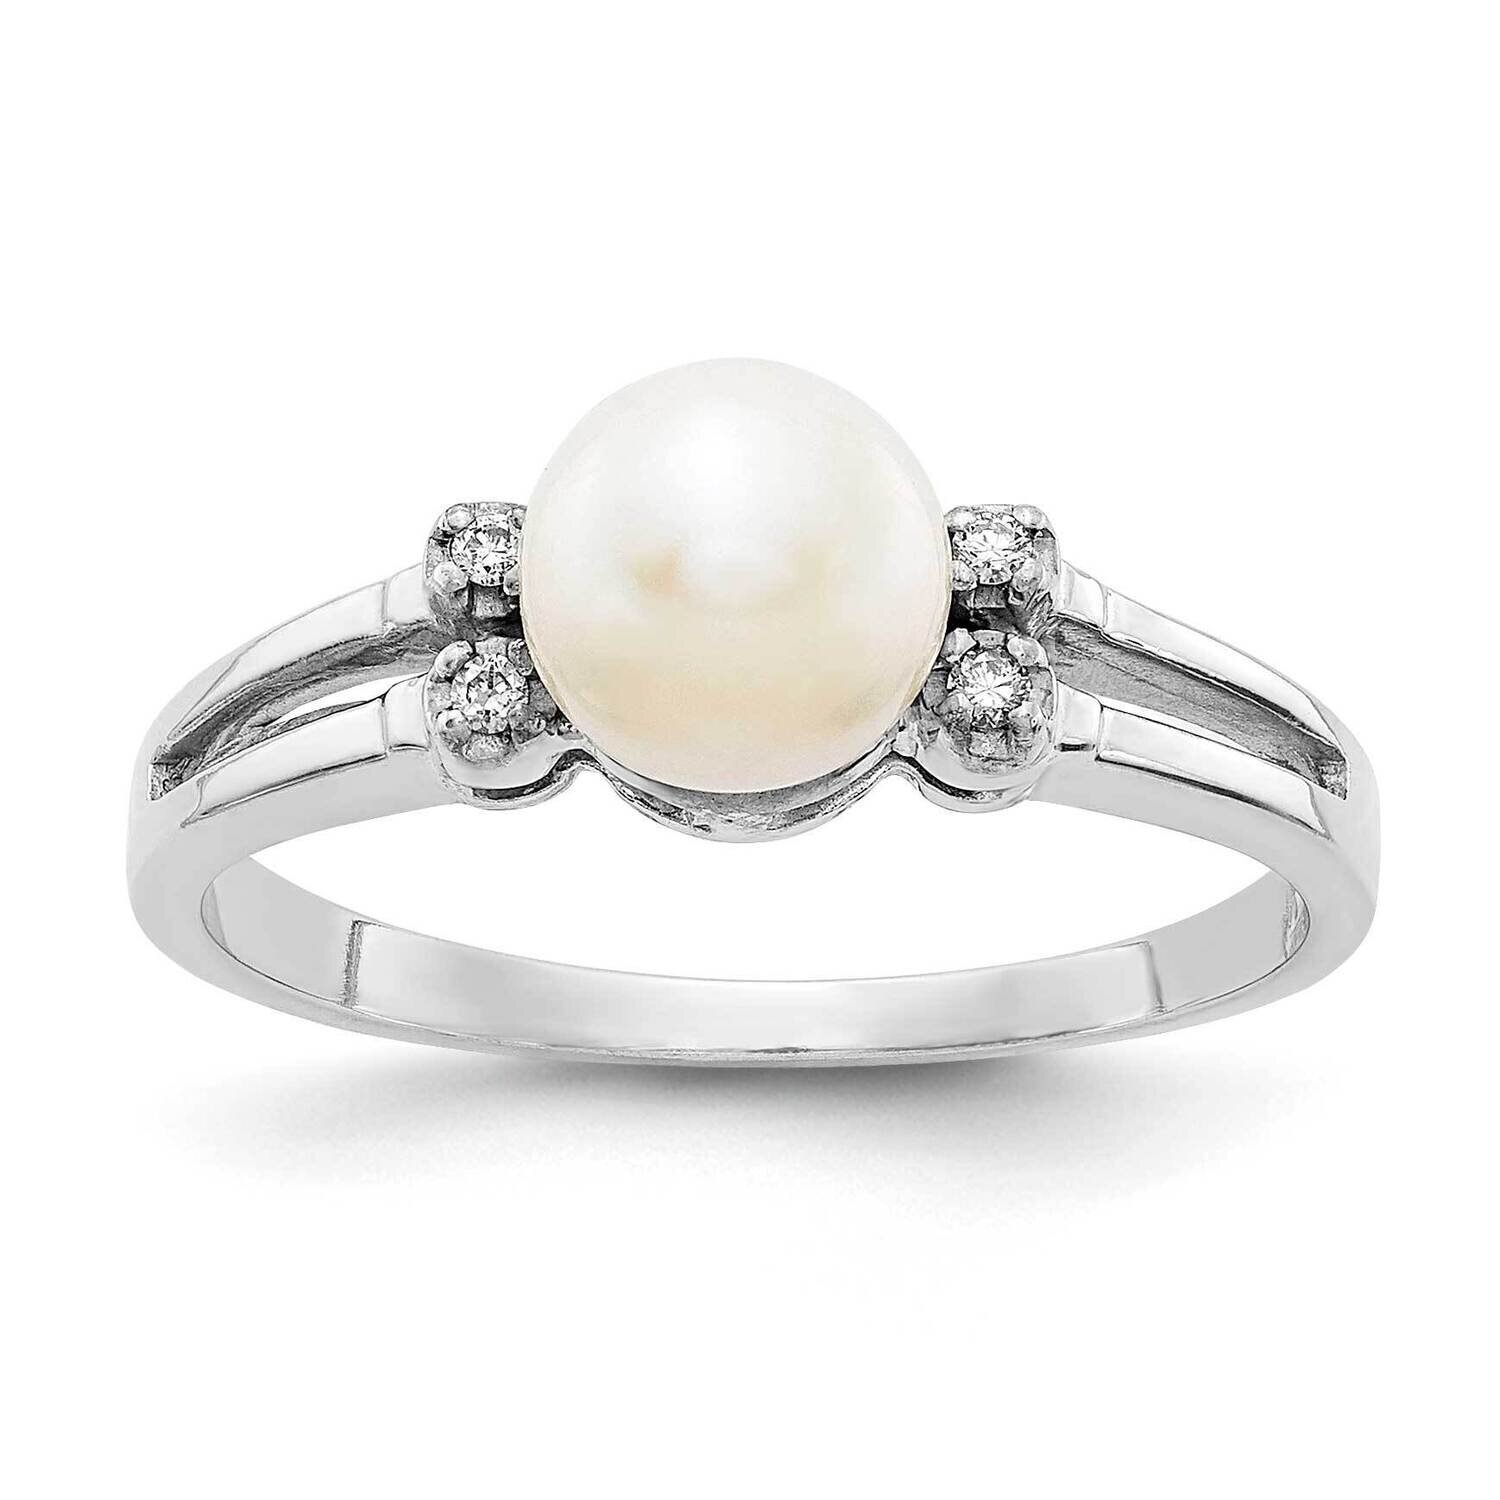 6mm Fw Cultured Pearl Aaa Diamond Ring 14k White Gold Y1842PL/AAA